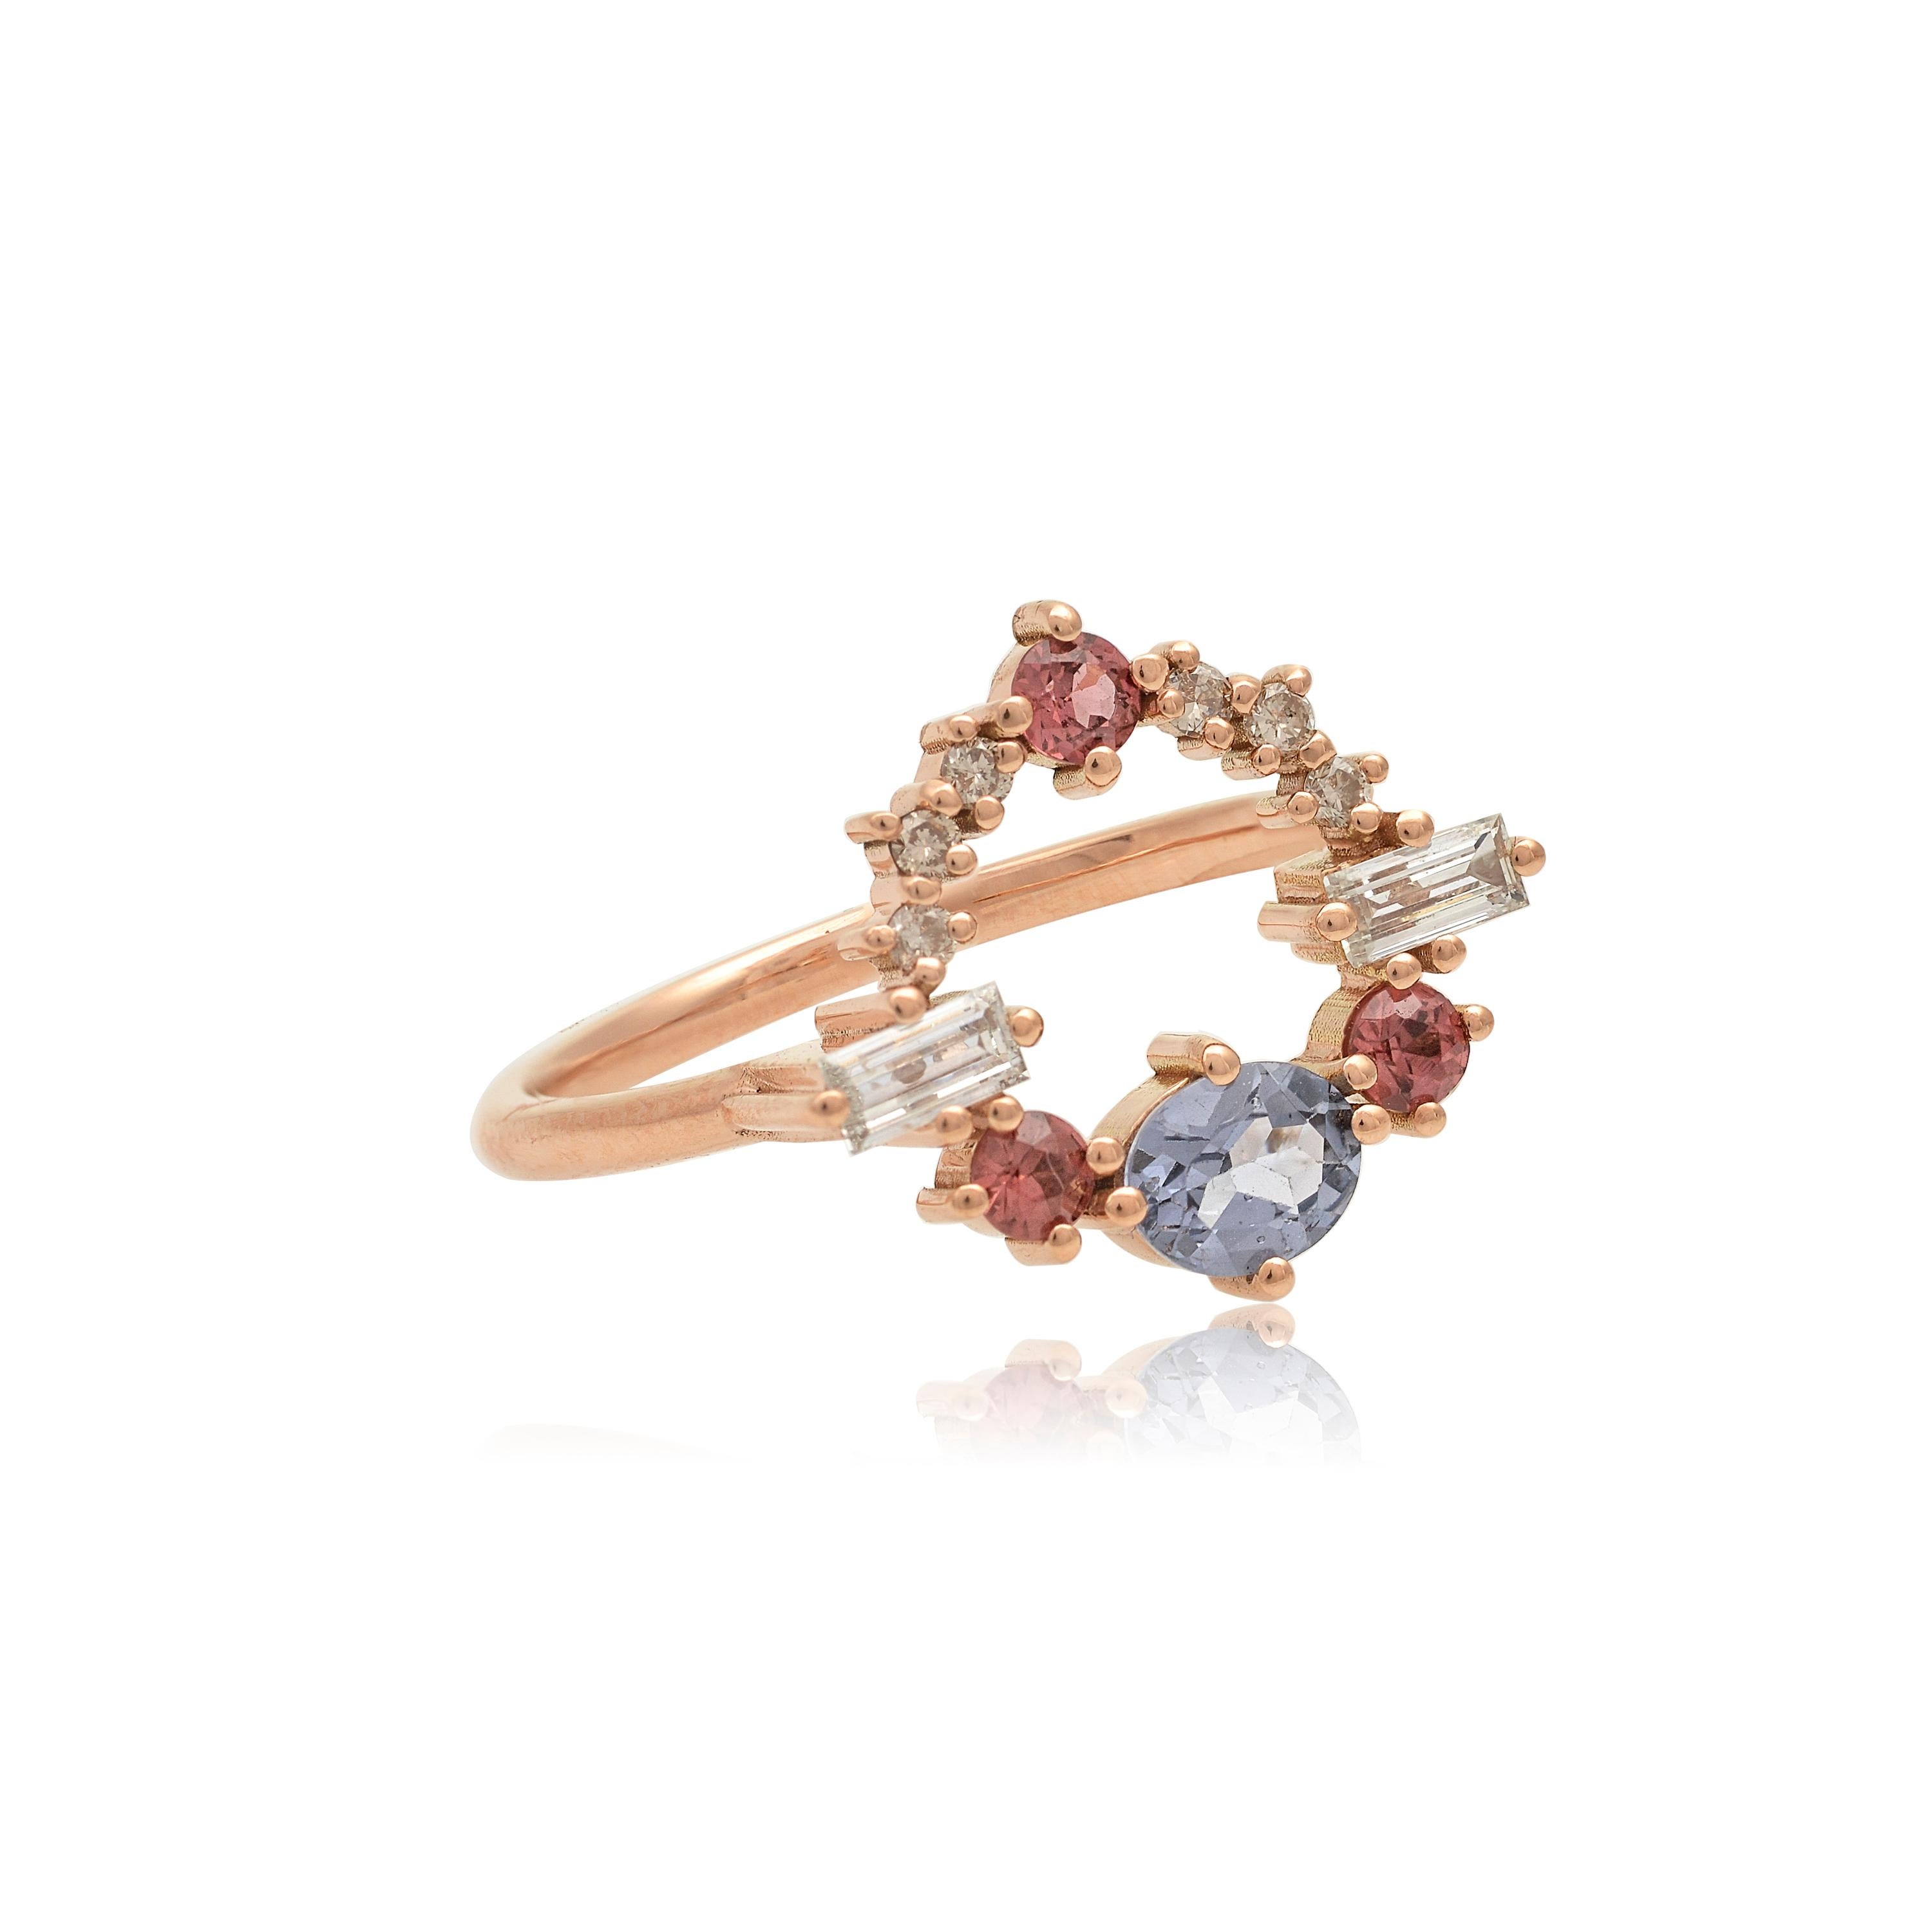 Designer: Alexia Gryllaki
Dimensions: L16x21mm
Ring Size UK P 1/2, US 8
Weight: approximately 3.3g  
Barcode: OFS039

Multi-stone ring in 18 karat rose gold with an oval faceted lilac spinel approx. 0.38cts, round faceted garnets approx. 0.25cts,